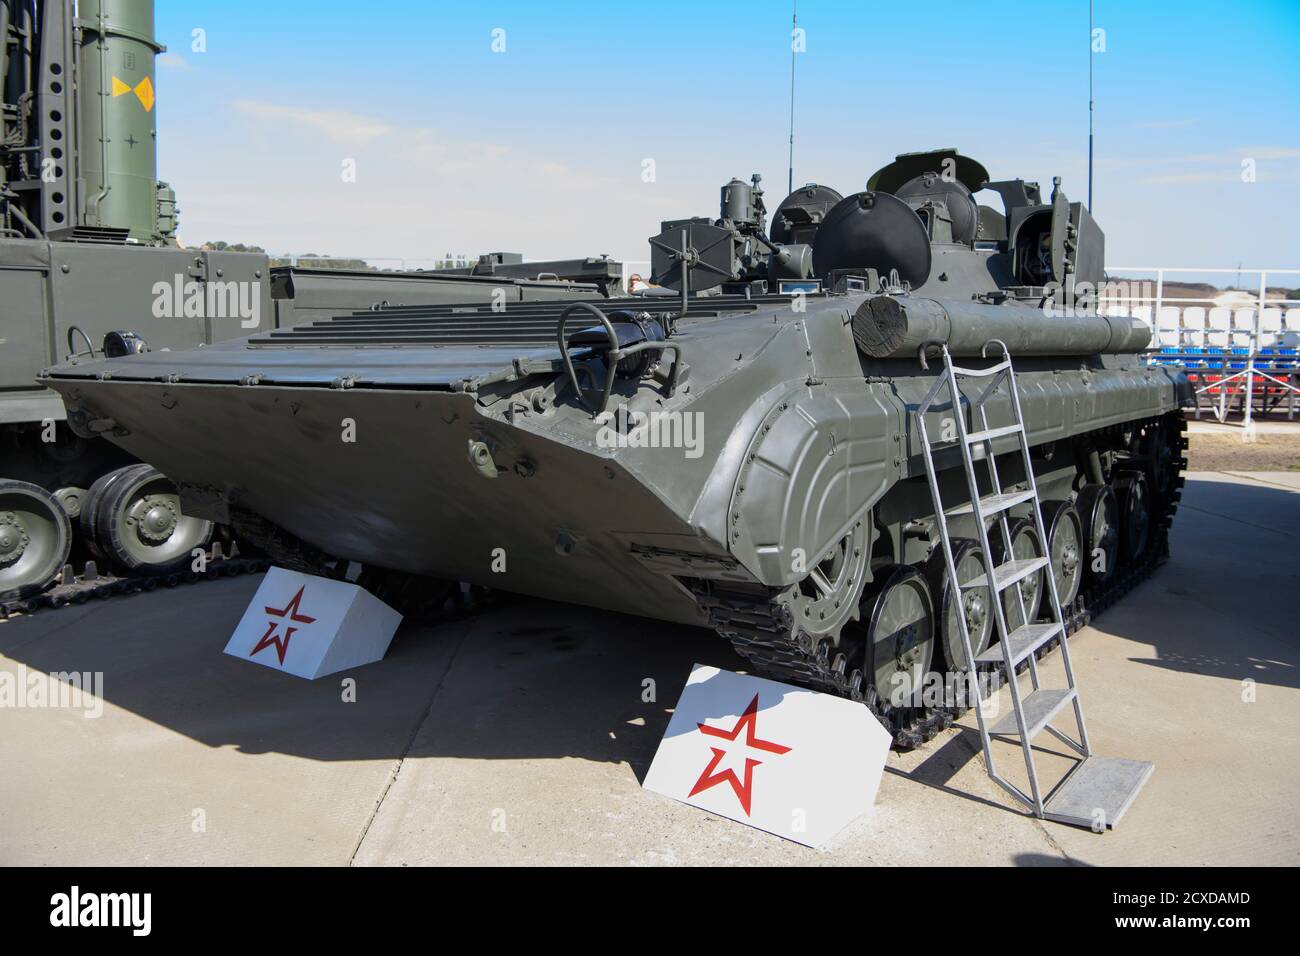 Rostov-on-Don, Russia - August 27, 2020: Mobile reconnaissance station PRP-4 at a military training ground Stock Photo